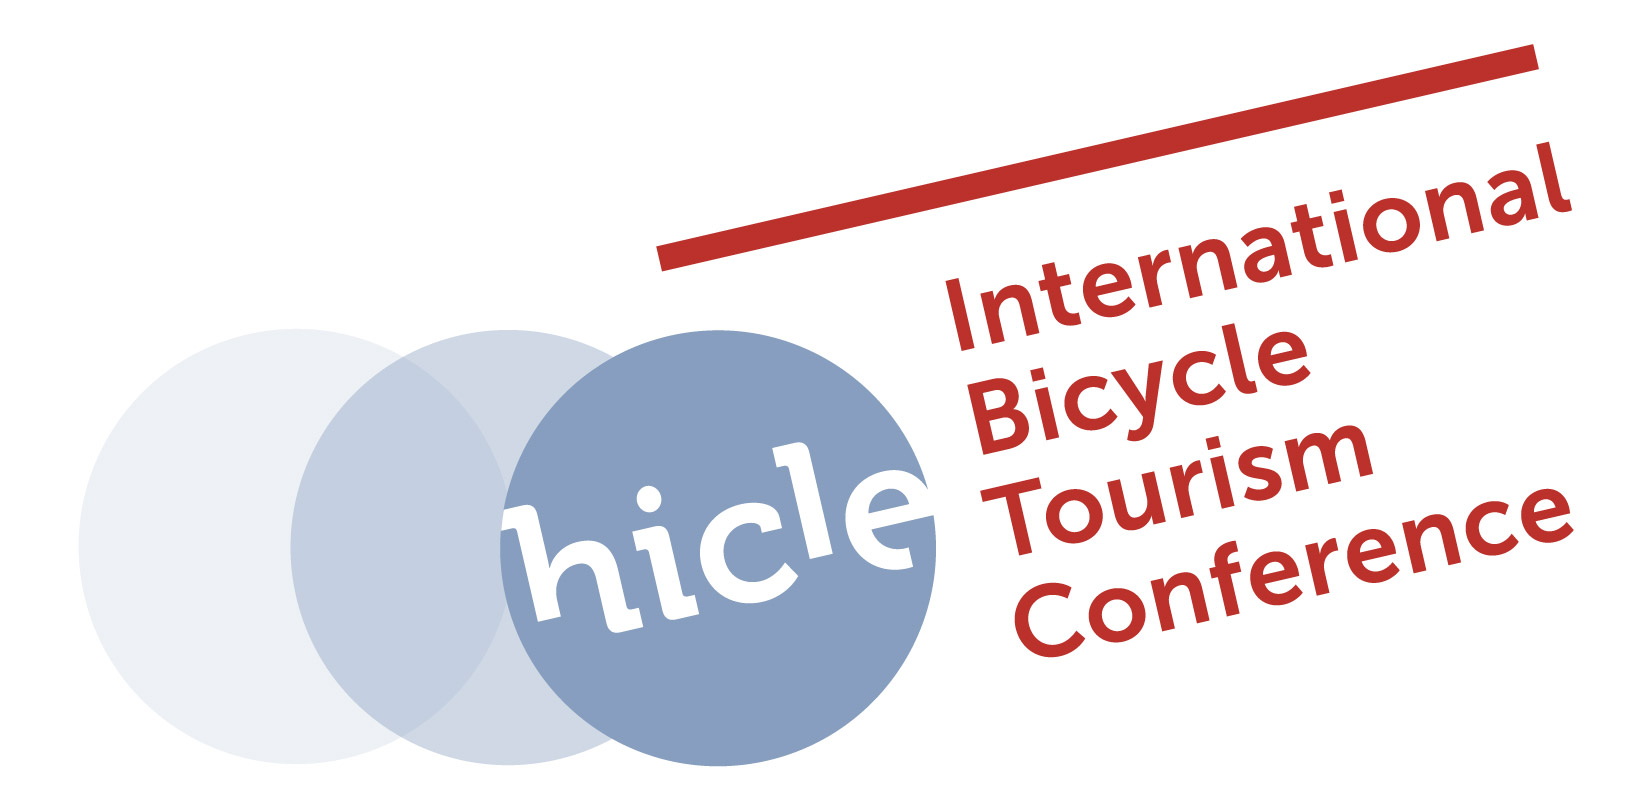 bicycle tourism conference logo ibtc